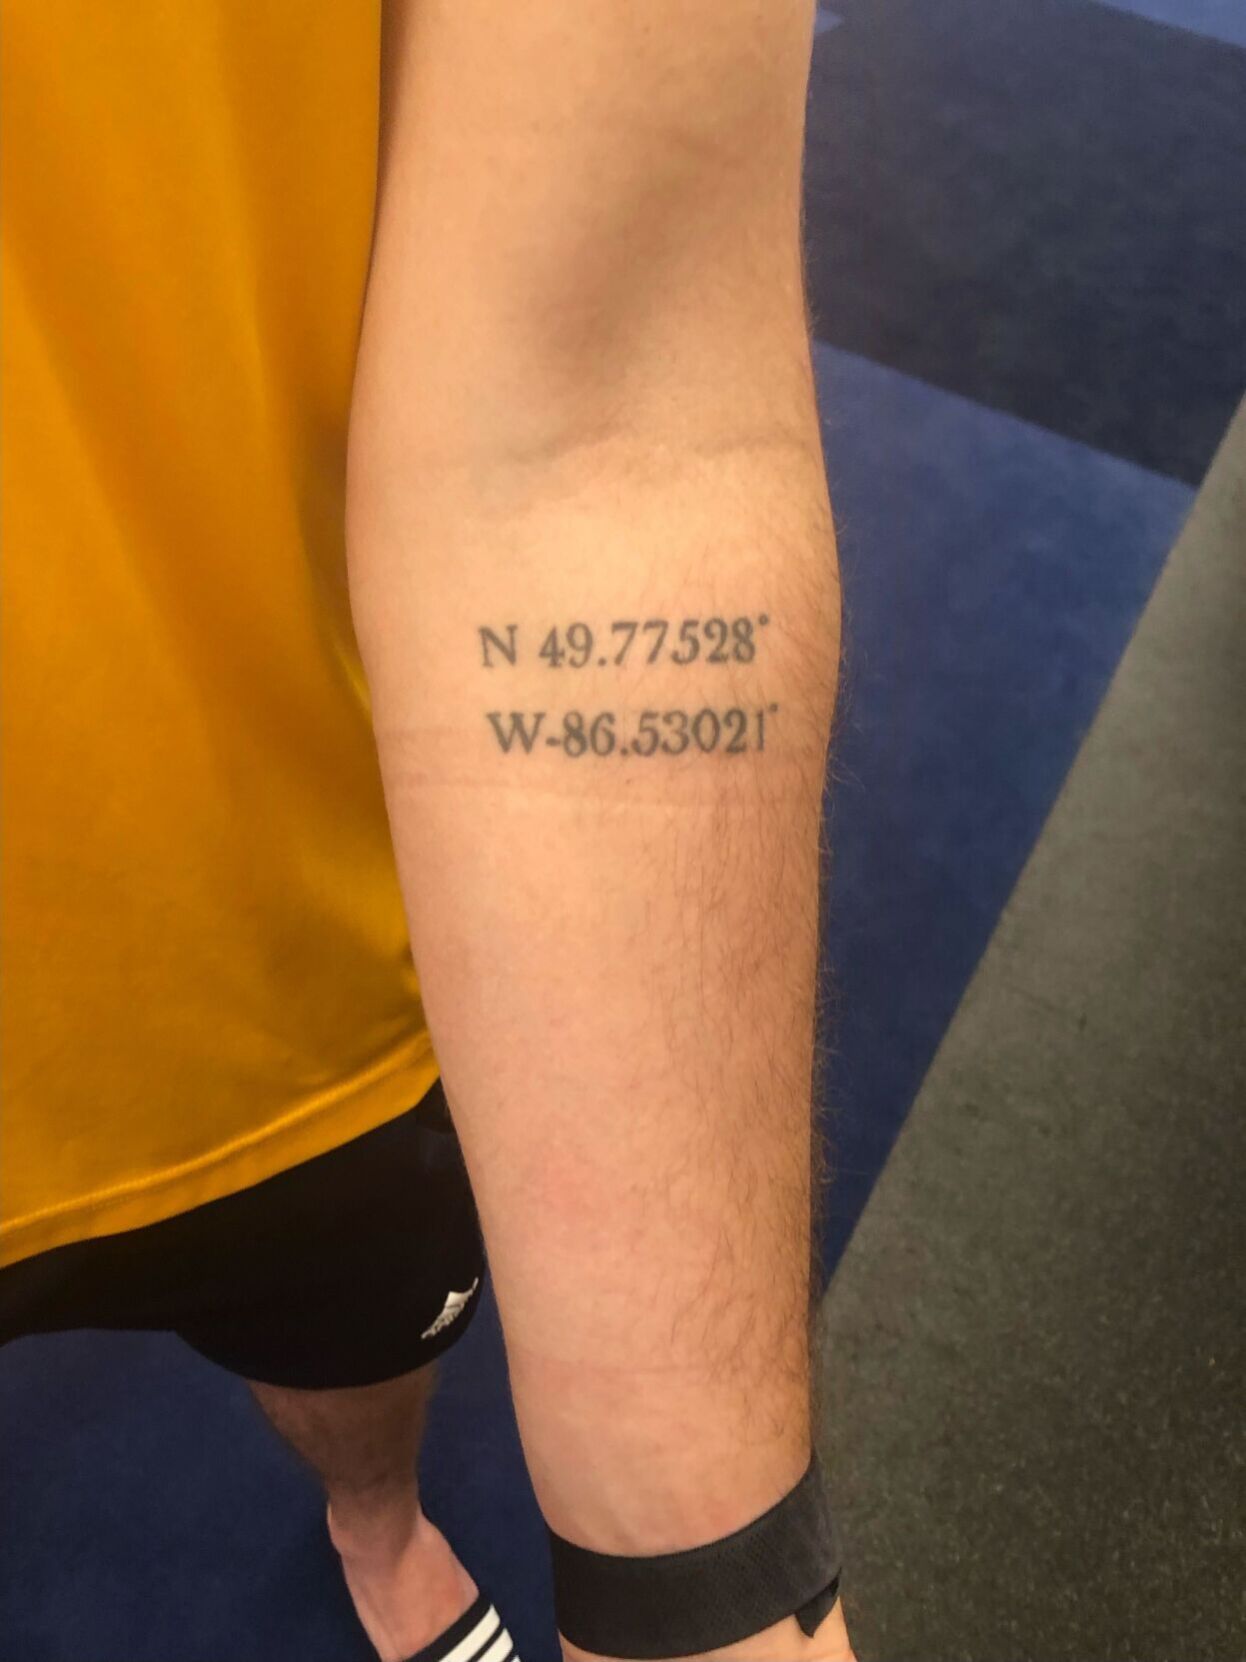 Dream Team  Just found out this is the tattoo Milan Skriniar has and its  absolutely blown my mind  Facebook